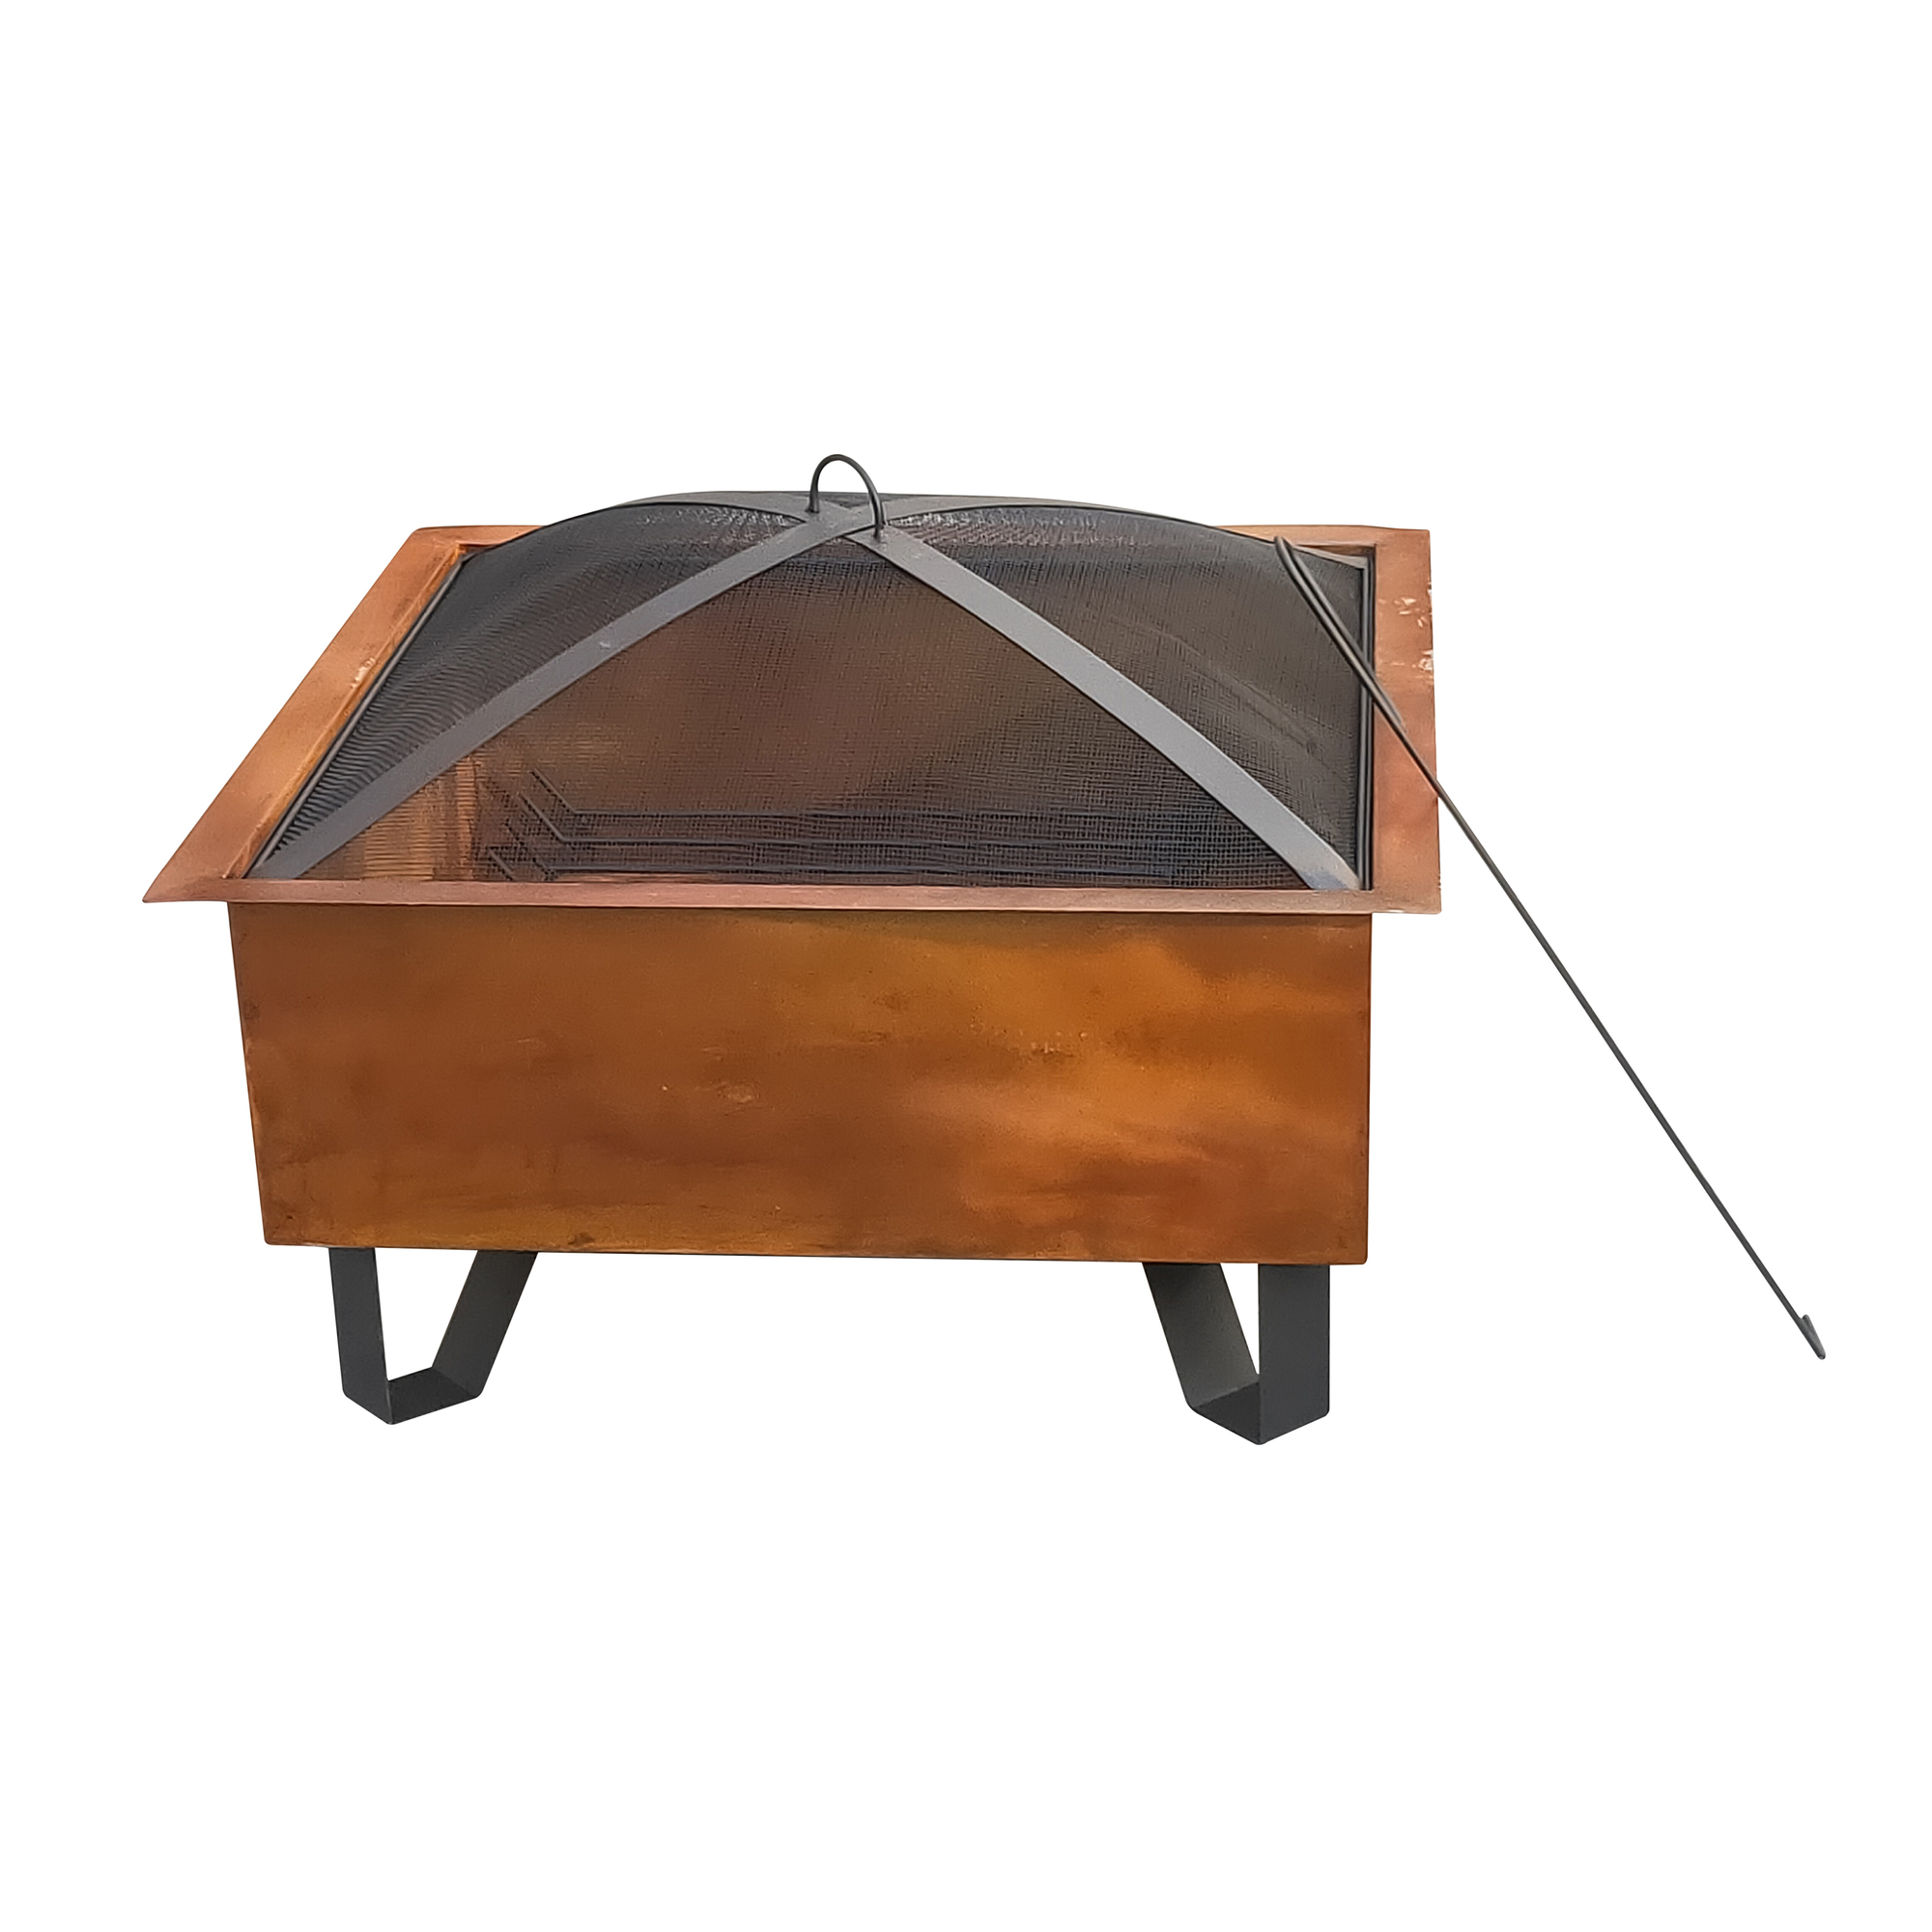 Bond, Boxite 26Inch Wood Burning Fire Pit, Fuel Type Wood, Diameter 26 in, Material Combination, Model 52119